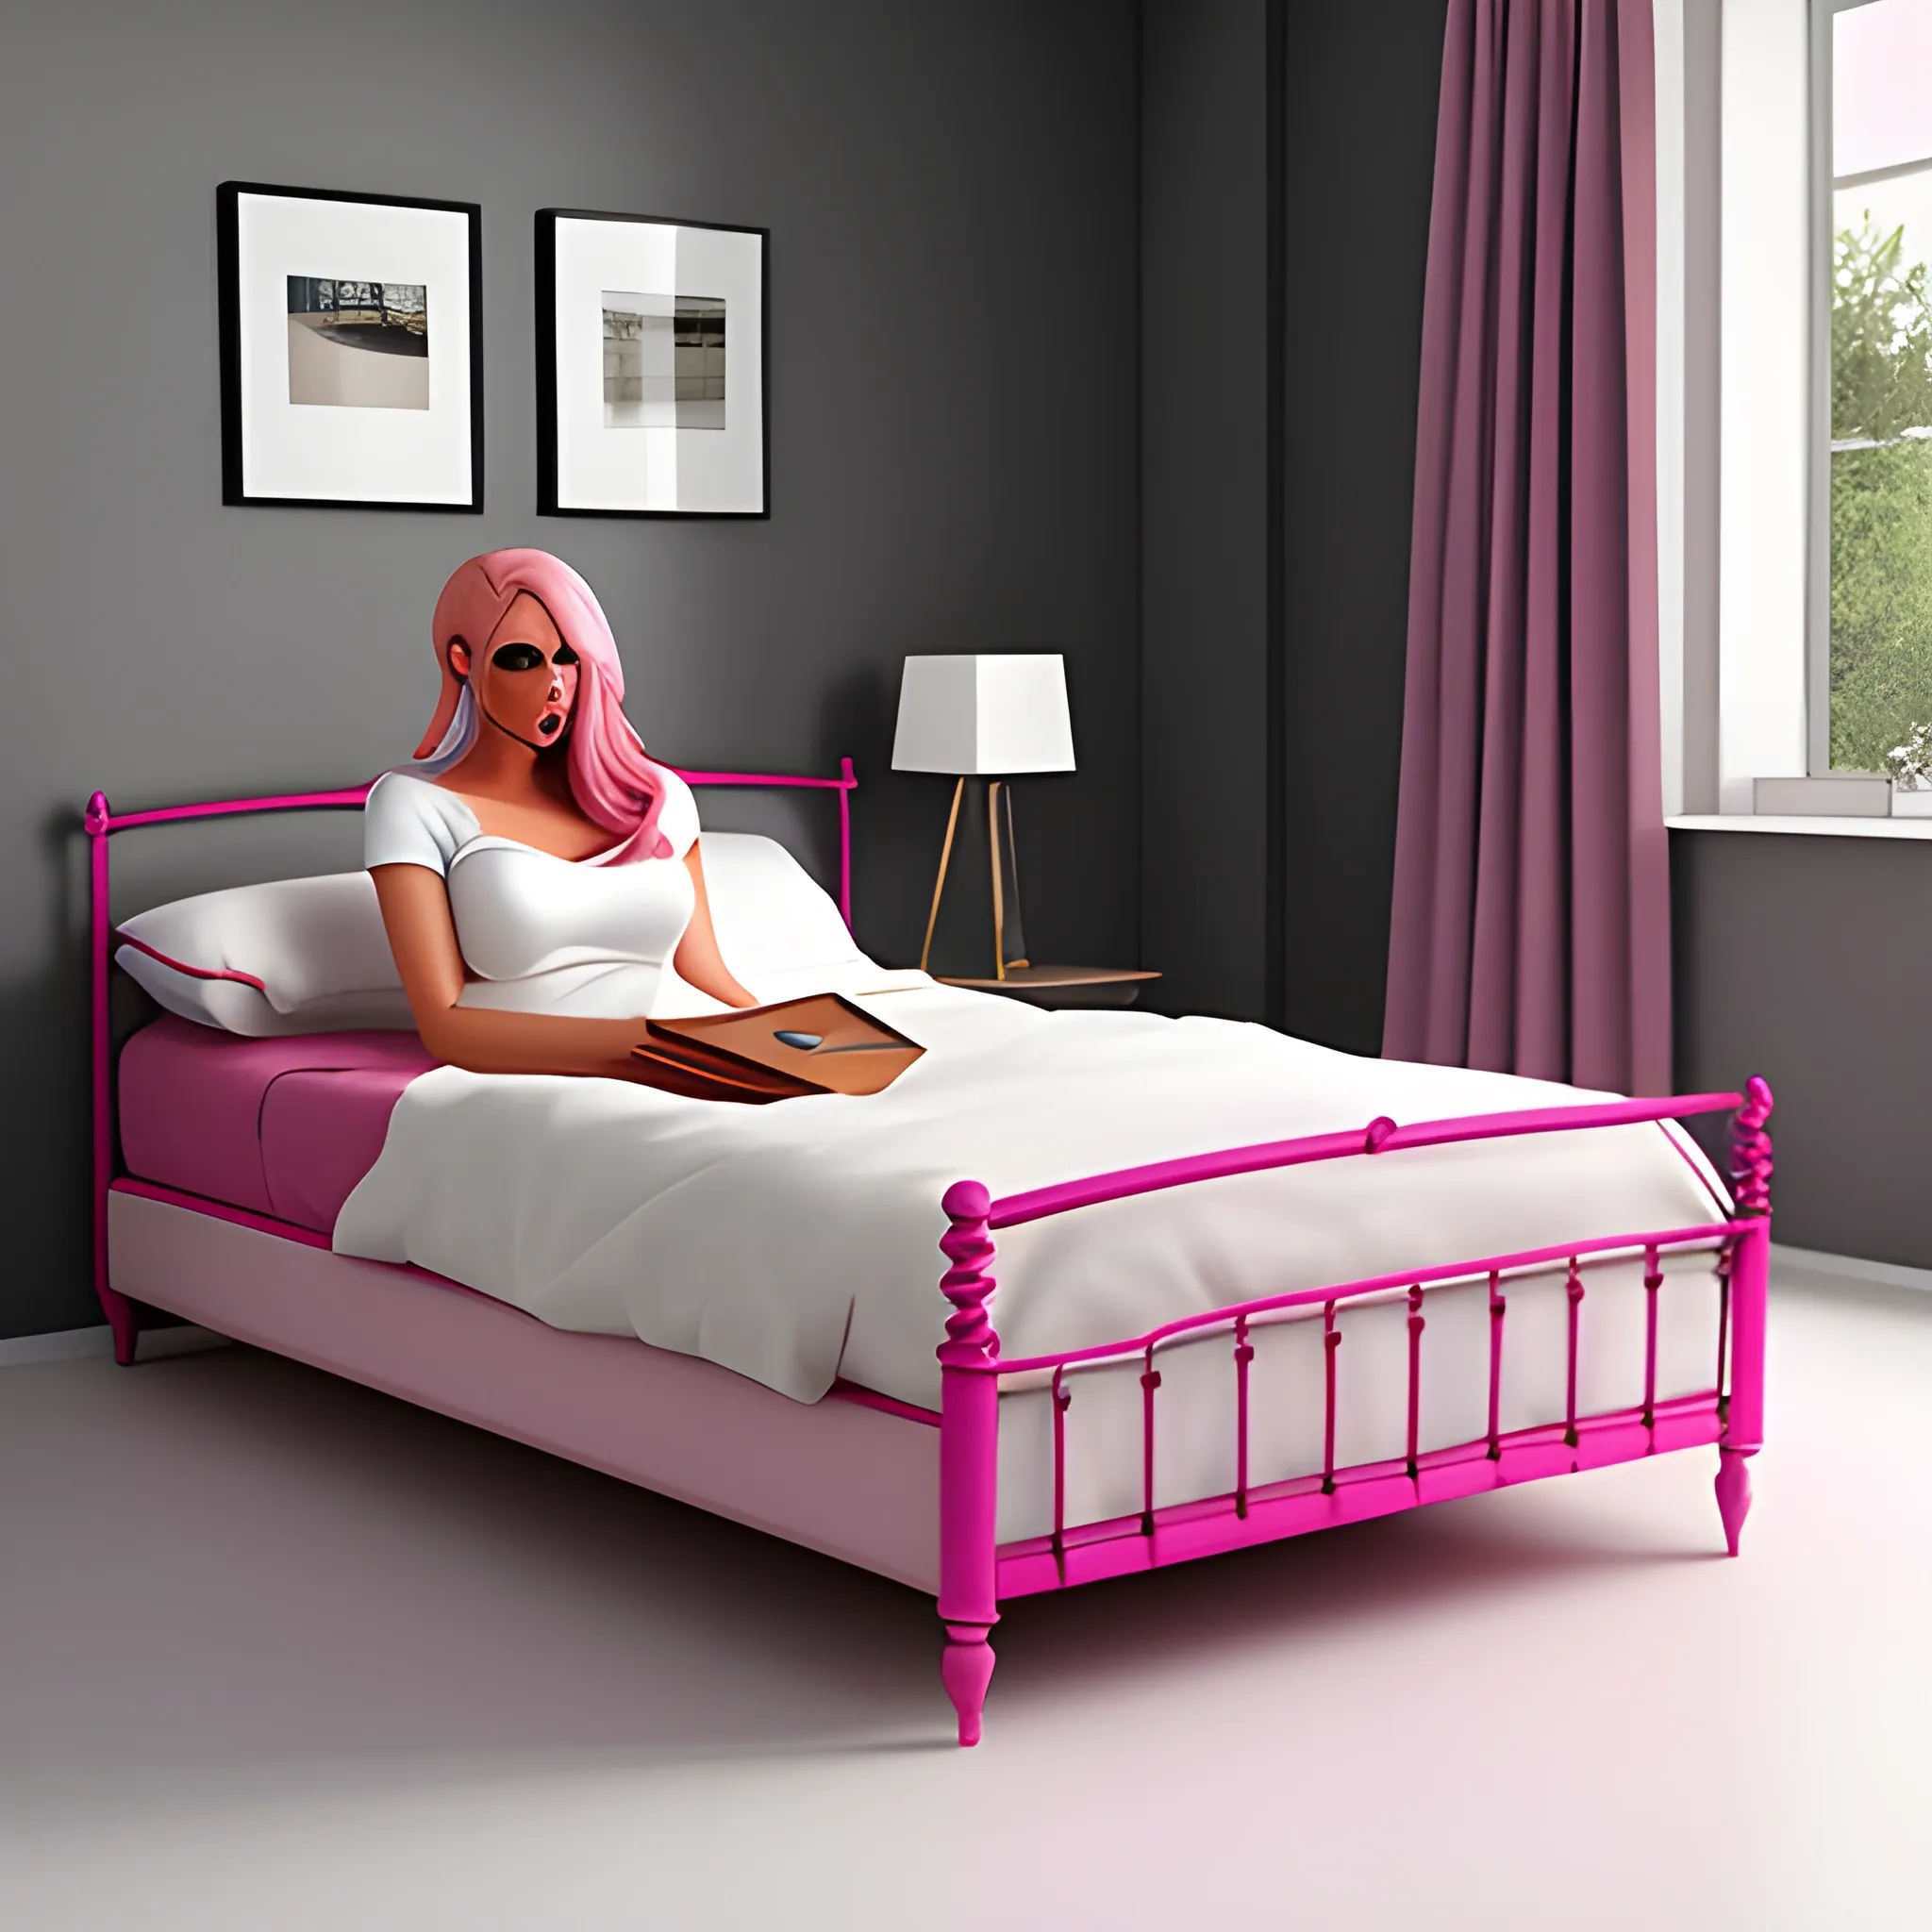 realistic young girl with pink hair, bed, house